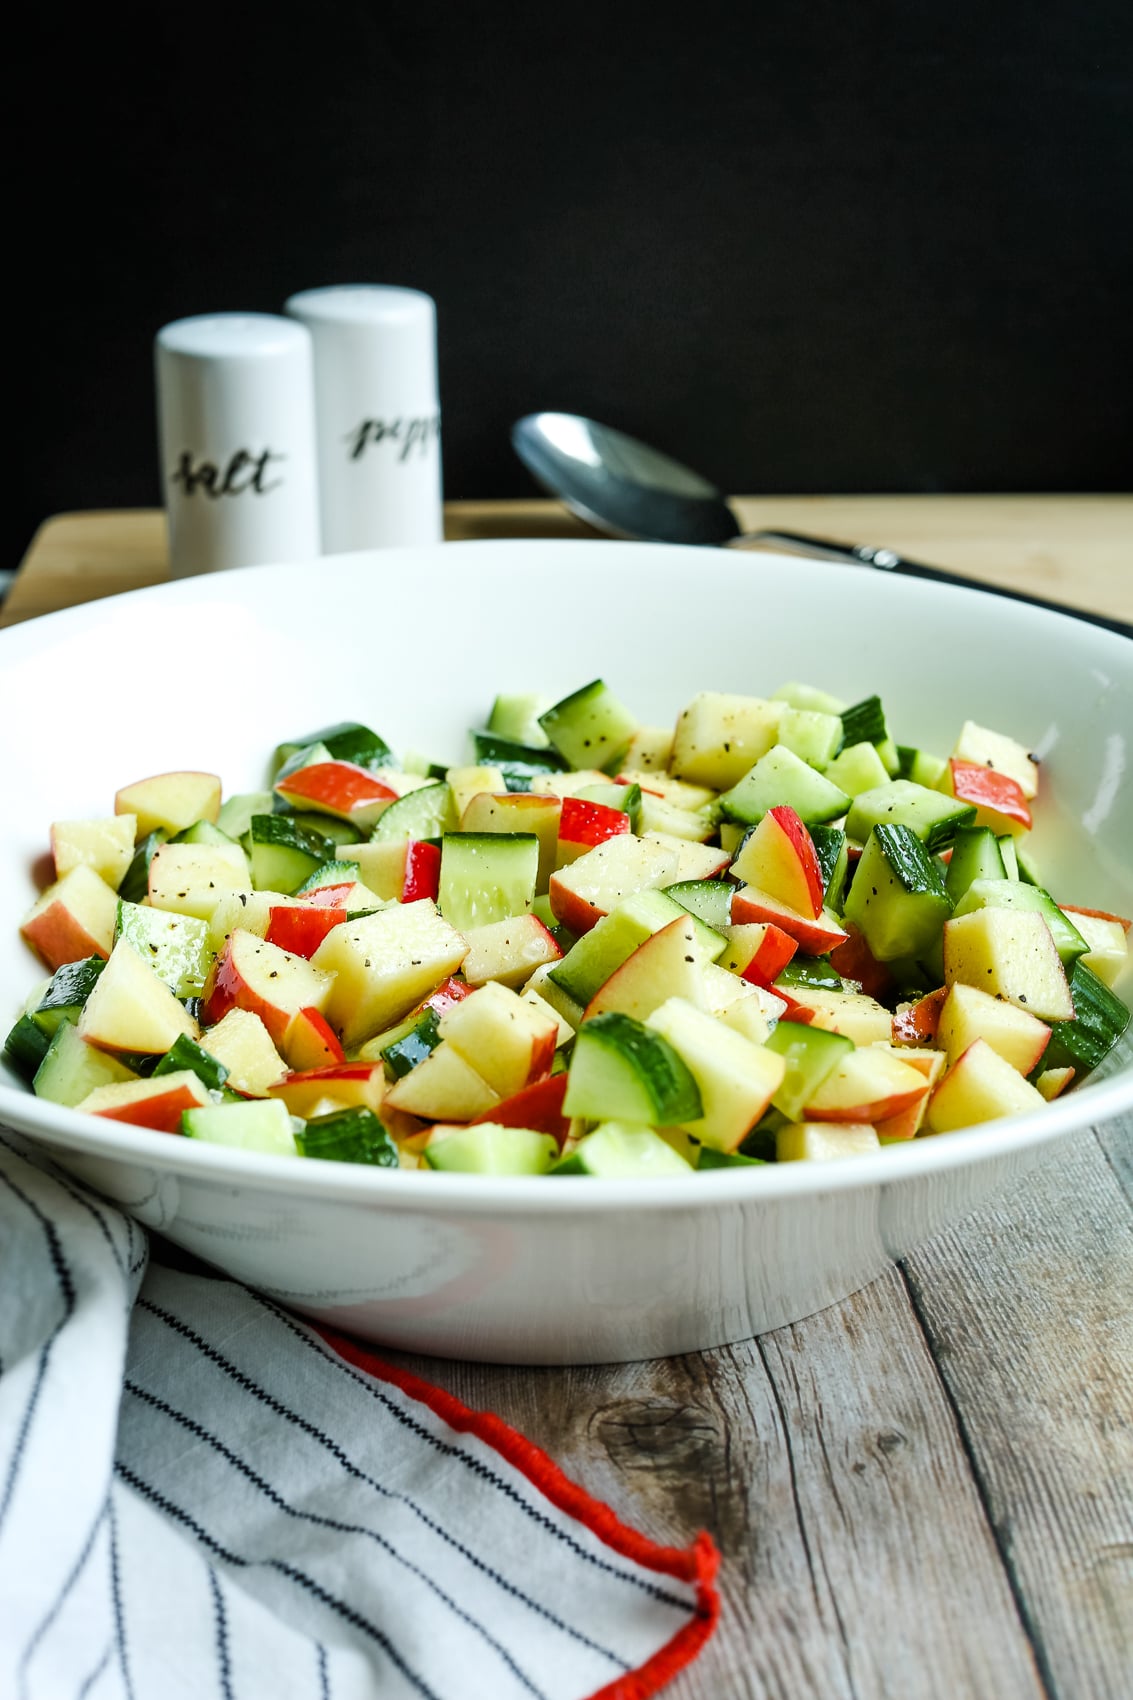 apple cucumber salad in a white bowl with a napkin next to the bowl and salt and pepper shakers in the background.